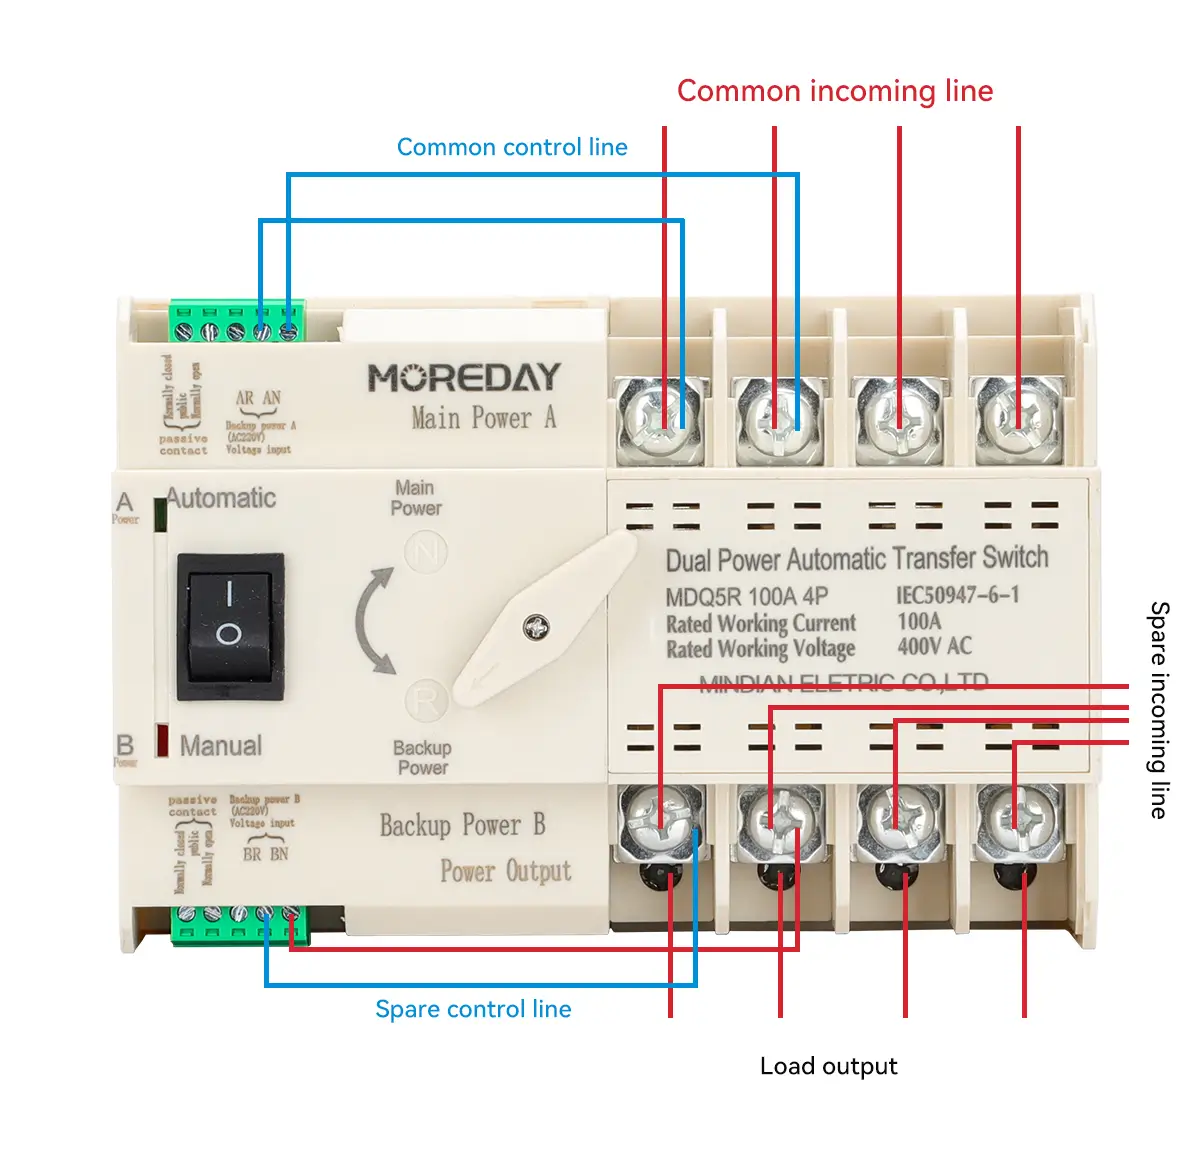 DUAL POWER AUTOMATIC TRANSFER SWITCH MDQ5R Instructions